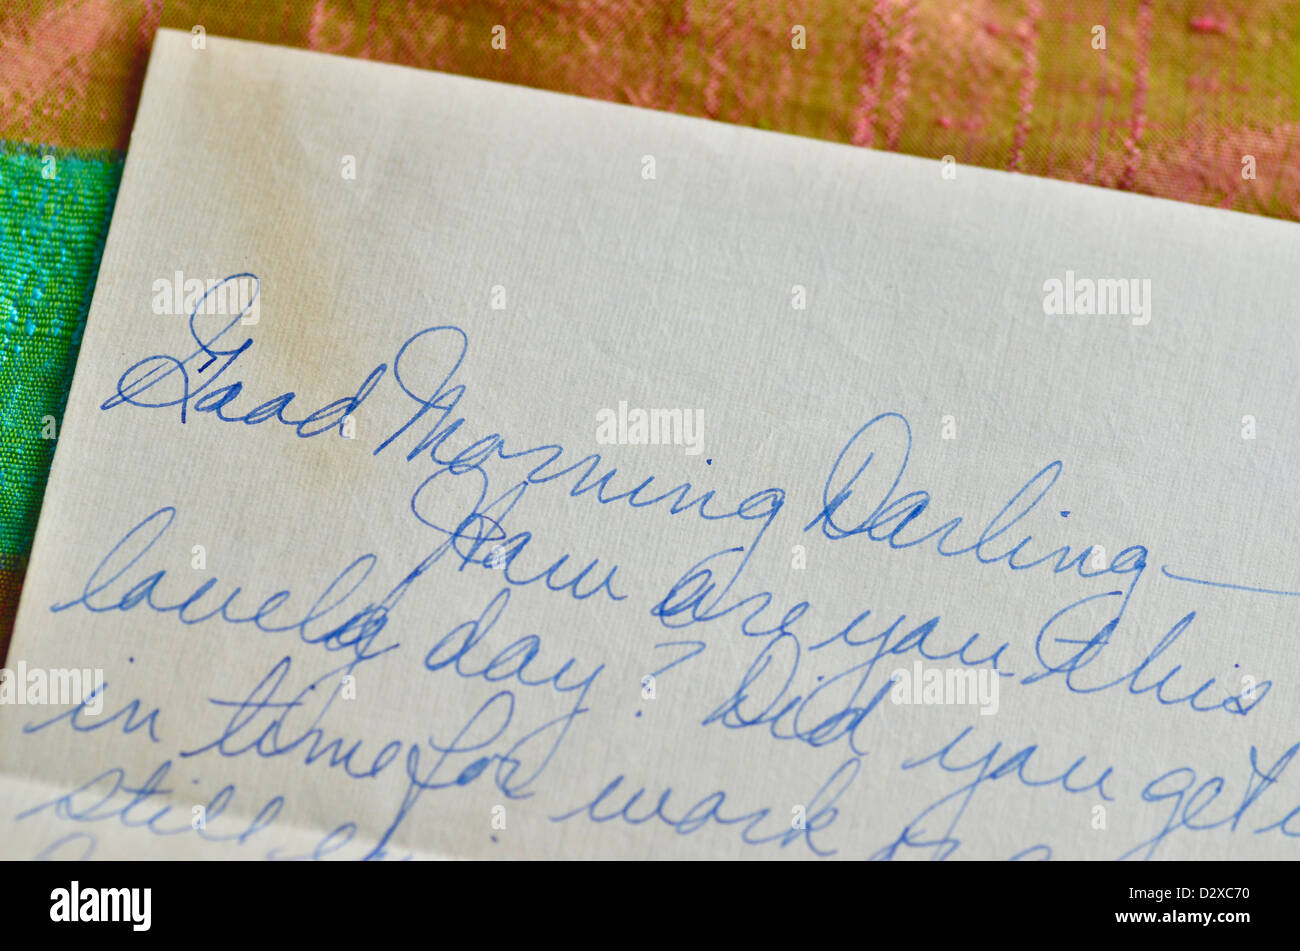 Old Love letter on fabric background. Stock Photo